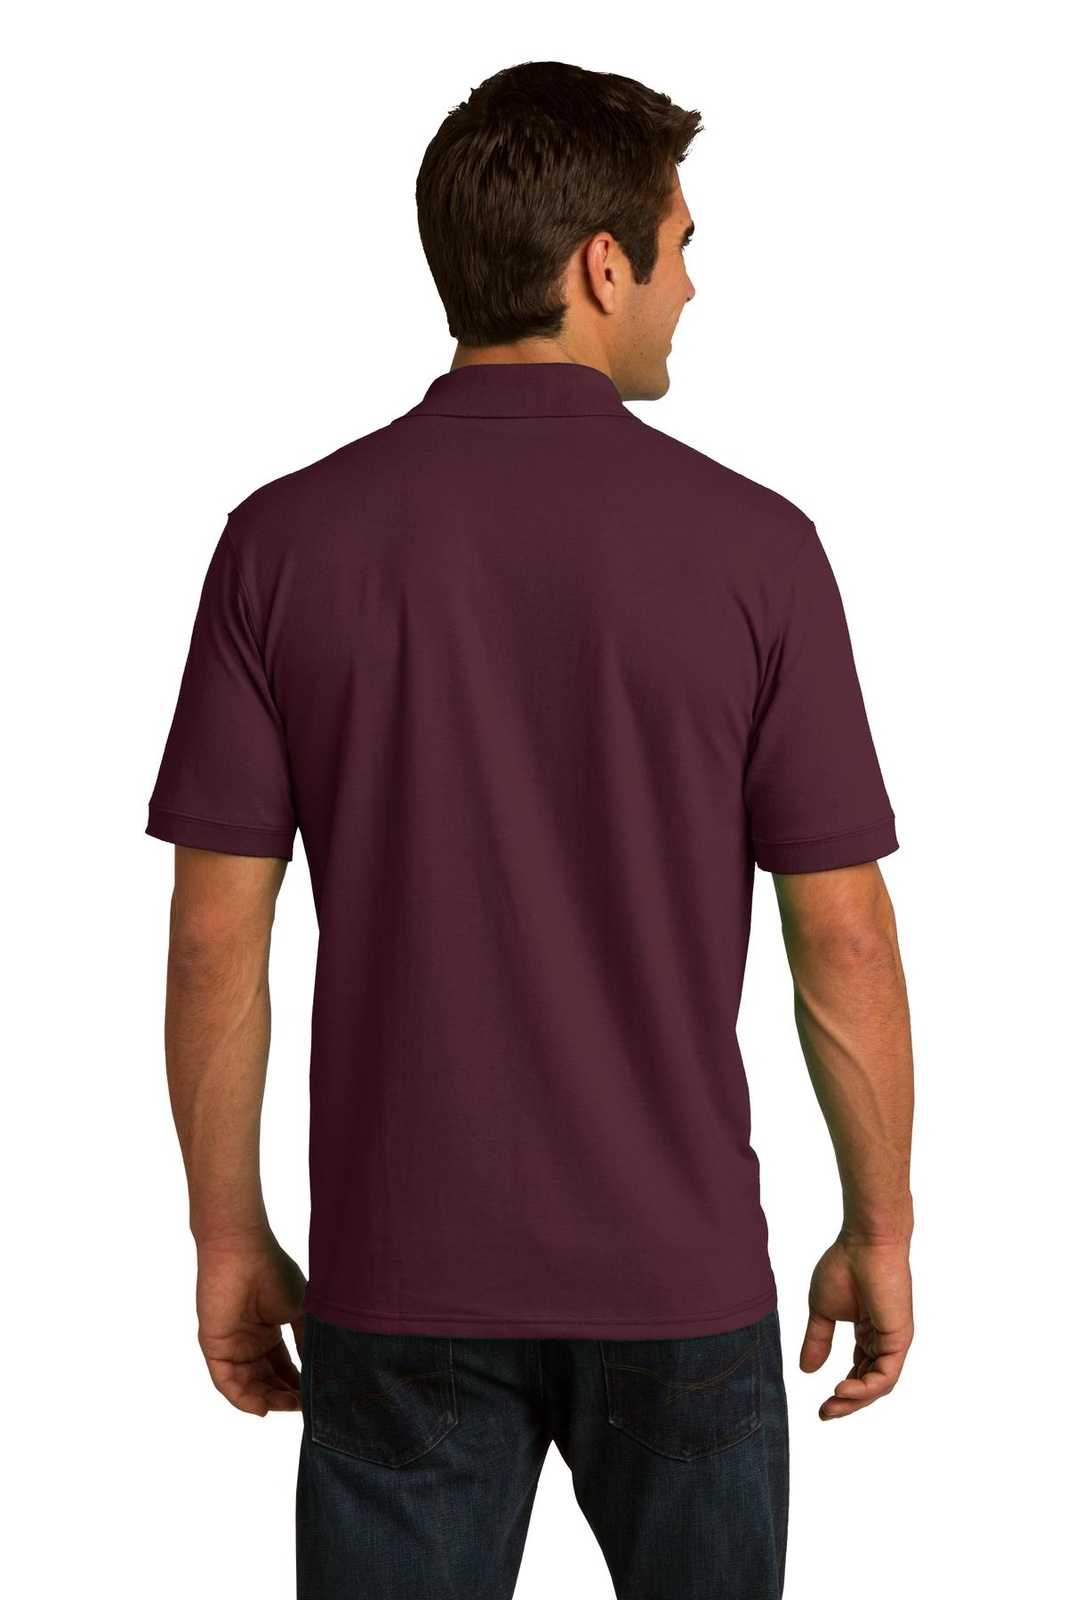 Port & Company KP55T Tall Core Blend Jersey Knit Polo - Athletic Maroon - HIT a Double - 1